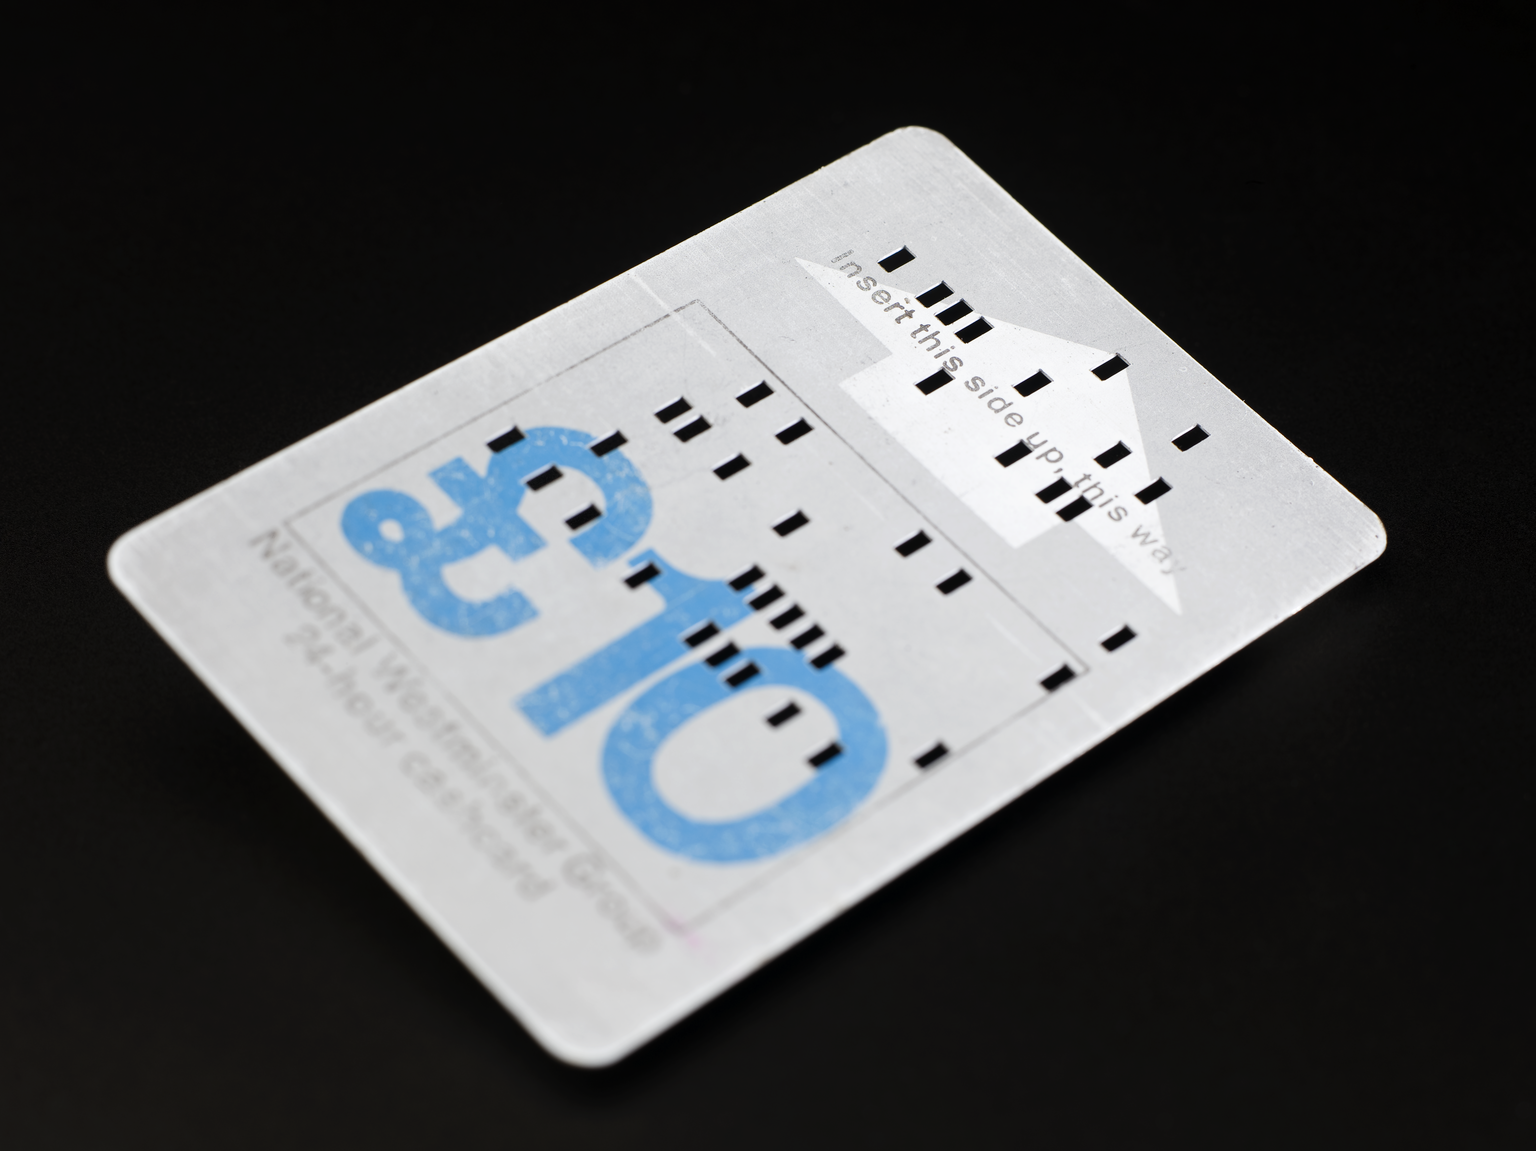 National Westminster bank punched card for use in cash machines